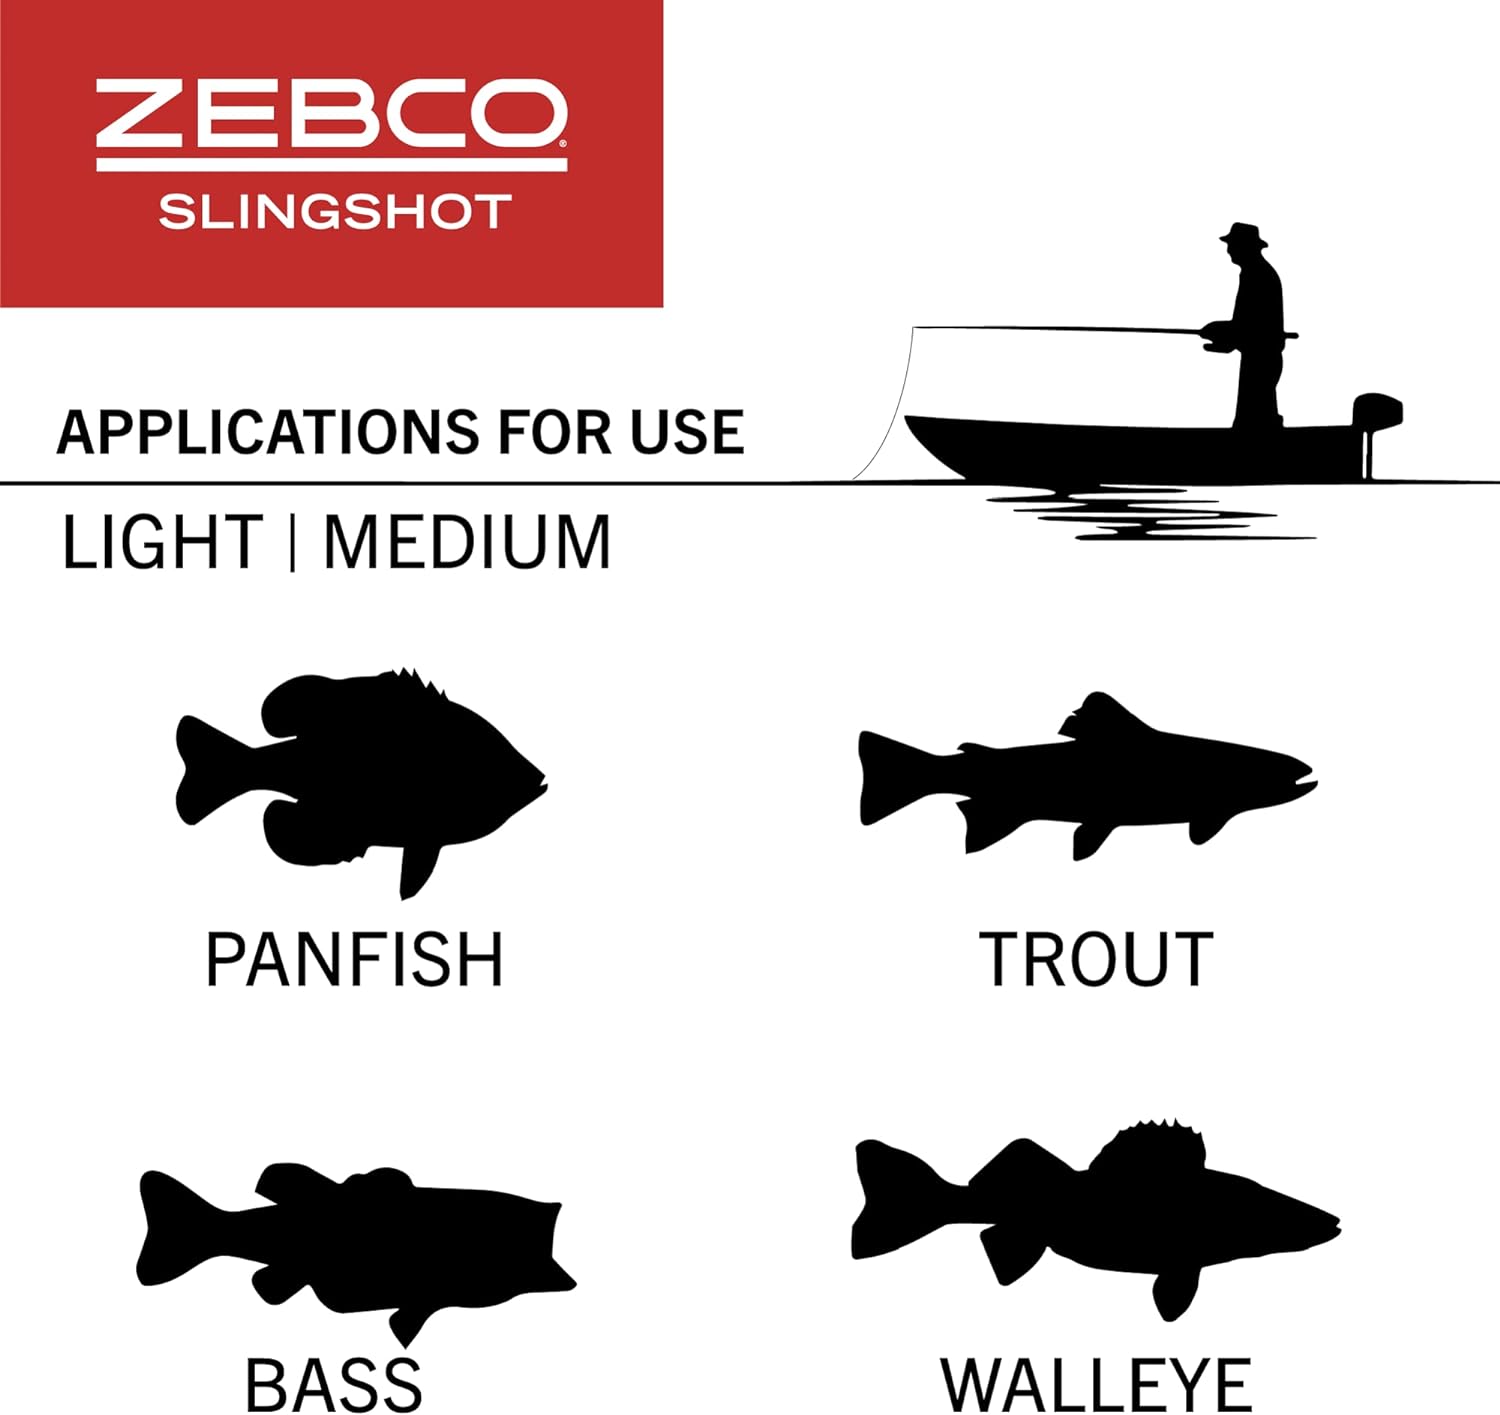 Zebco Slingshot Spincast Reel And Fishing Rod Combo, 5-Foot 6-Inch 2-Piece Fishing Pole, Size 30 Reel, Right-Hand Retrieve, Pre-Spooled With 10-Pound Zebco Line